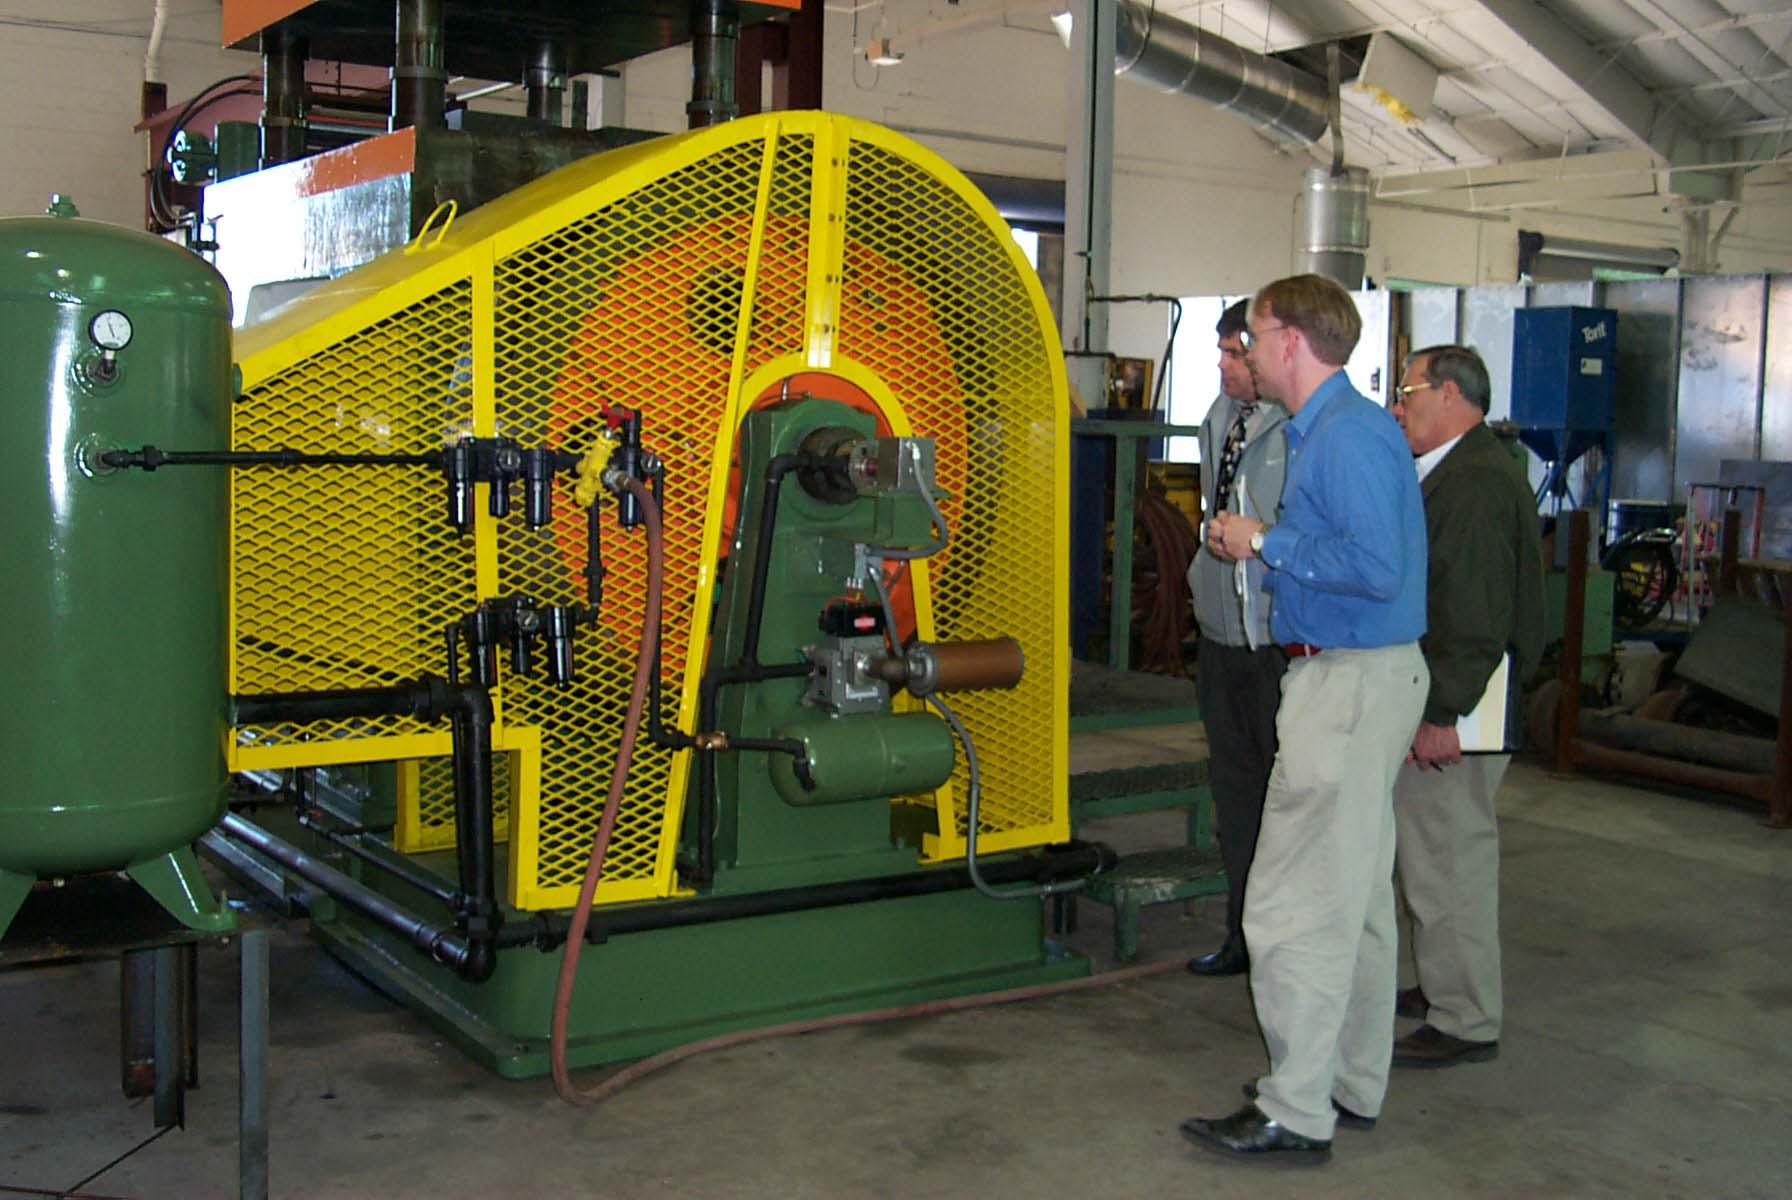 Completed 175-ton Brandes Press #144-175 Inspection